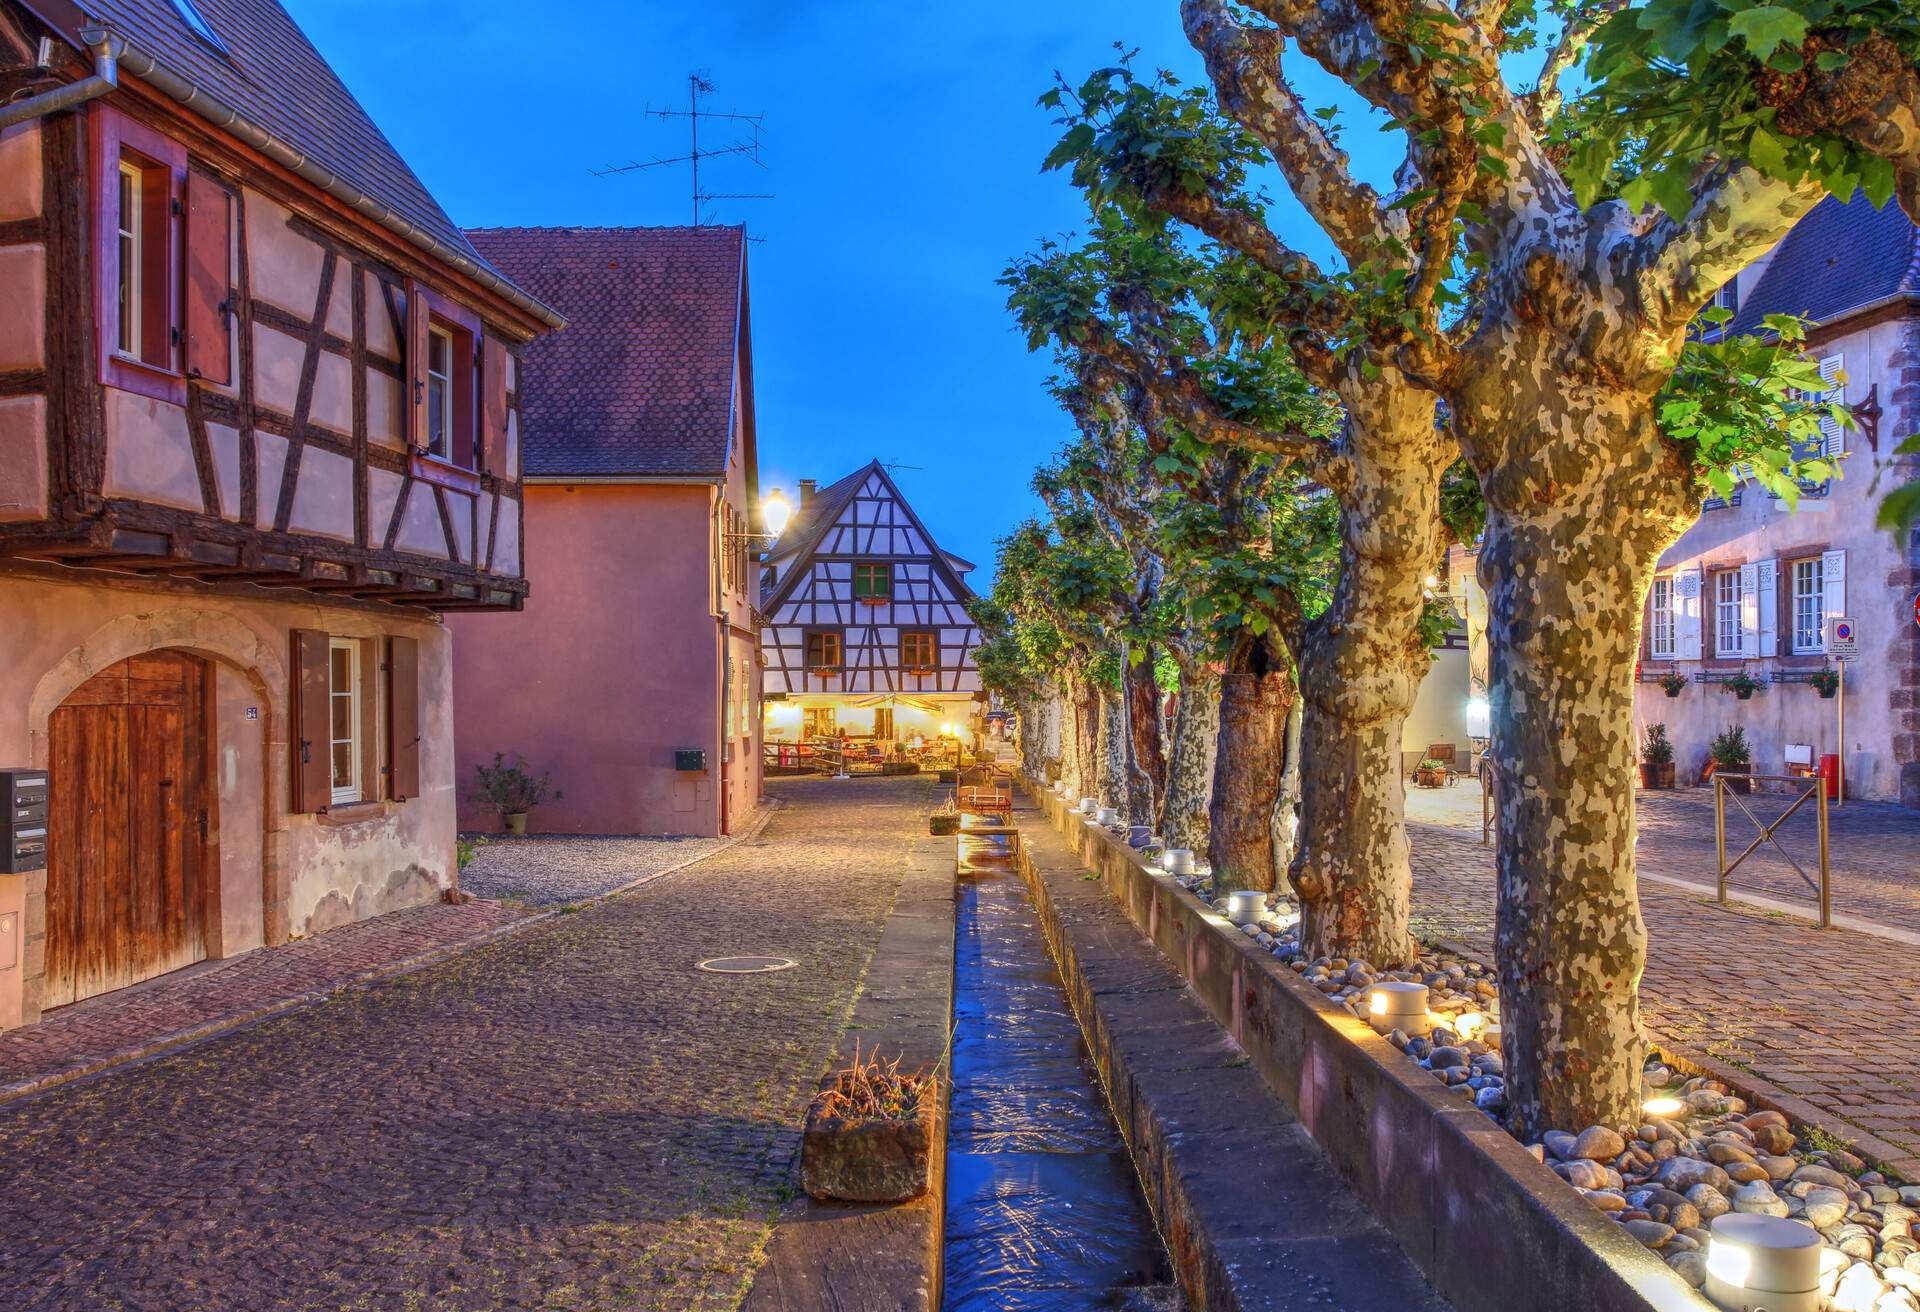 Night scene in Bergheim, a well preserved medieval town in Alsace, France